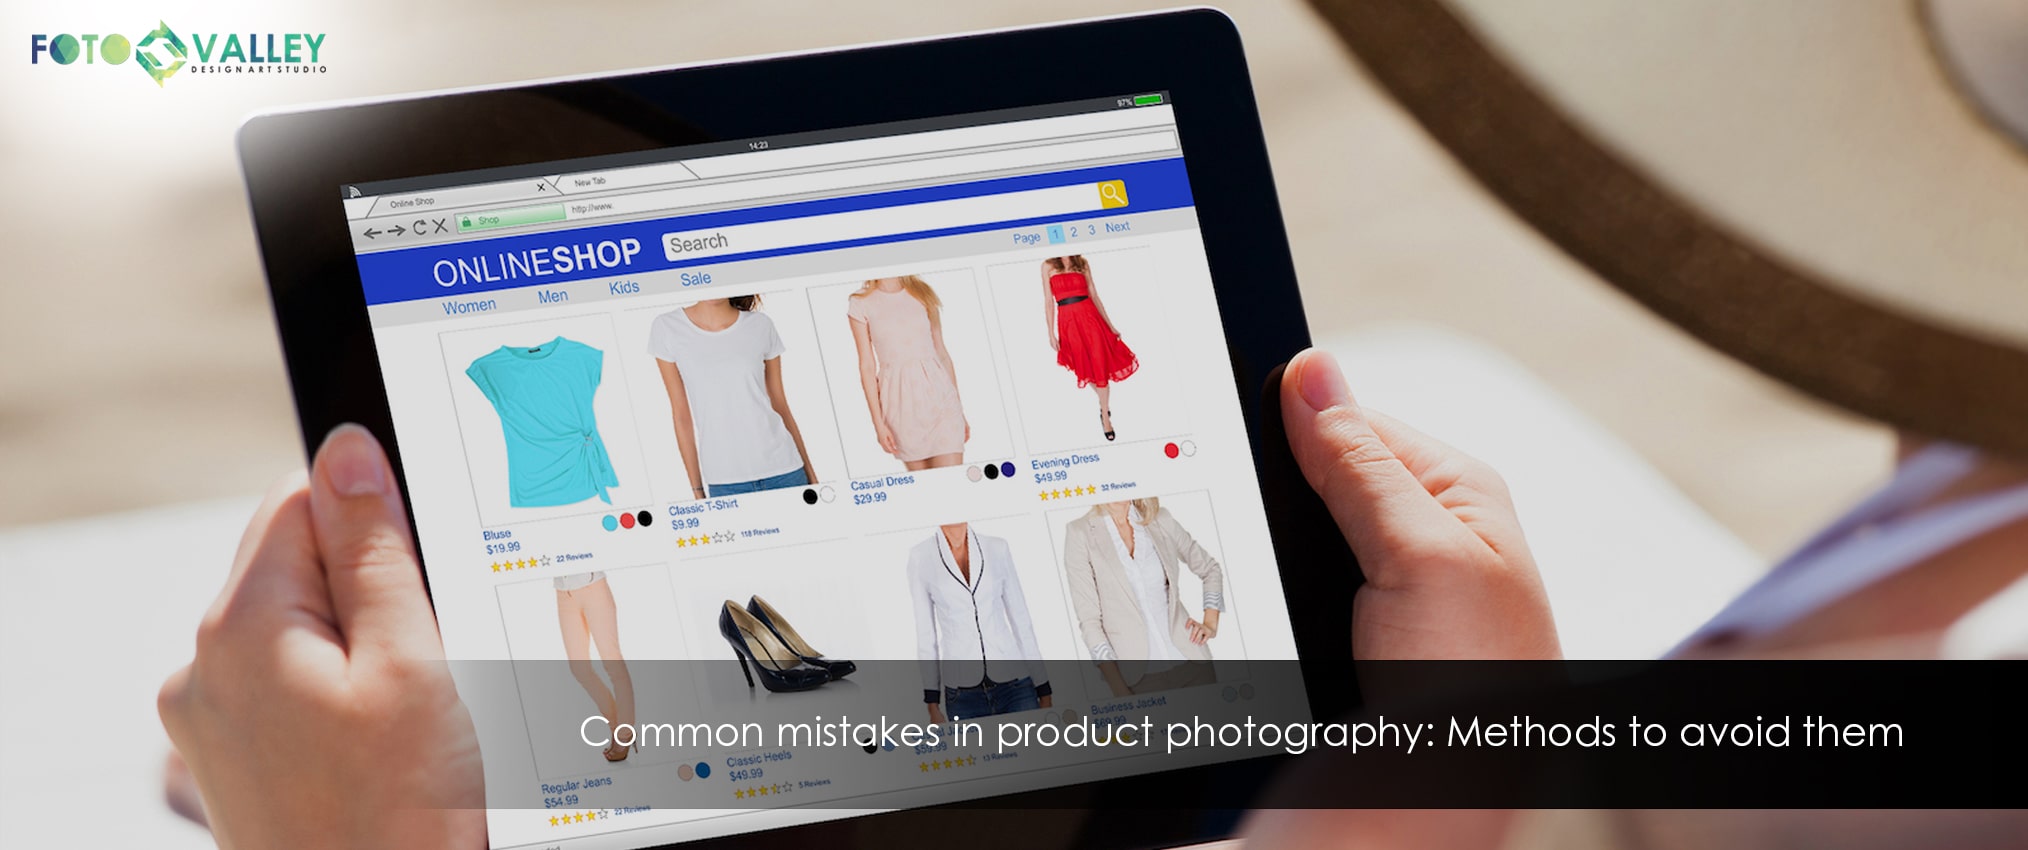 Common mistakes in product photography: Methods to avoid them